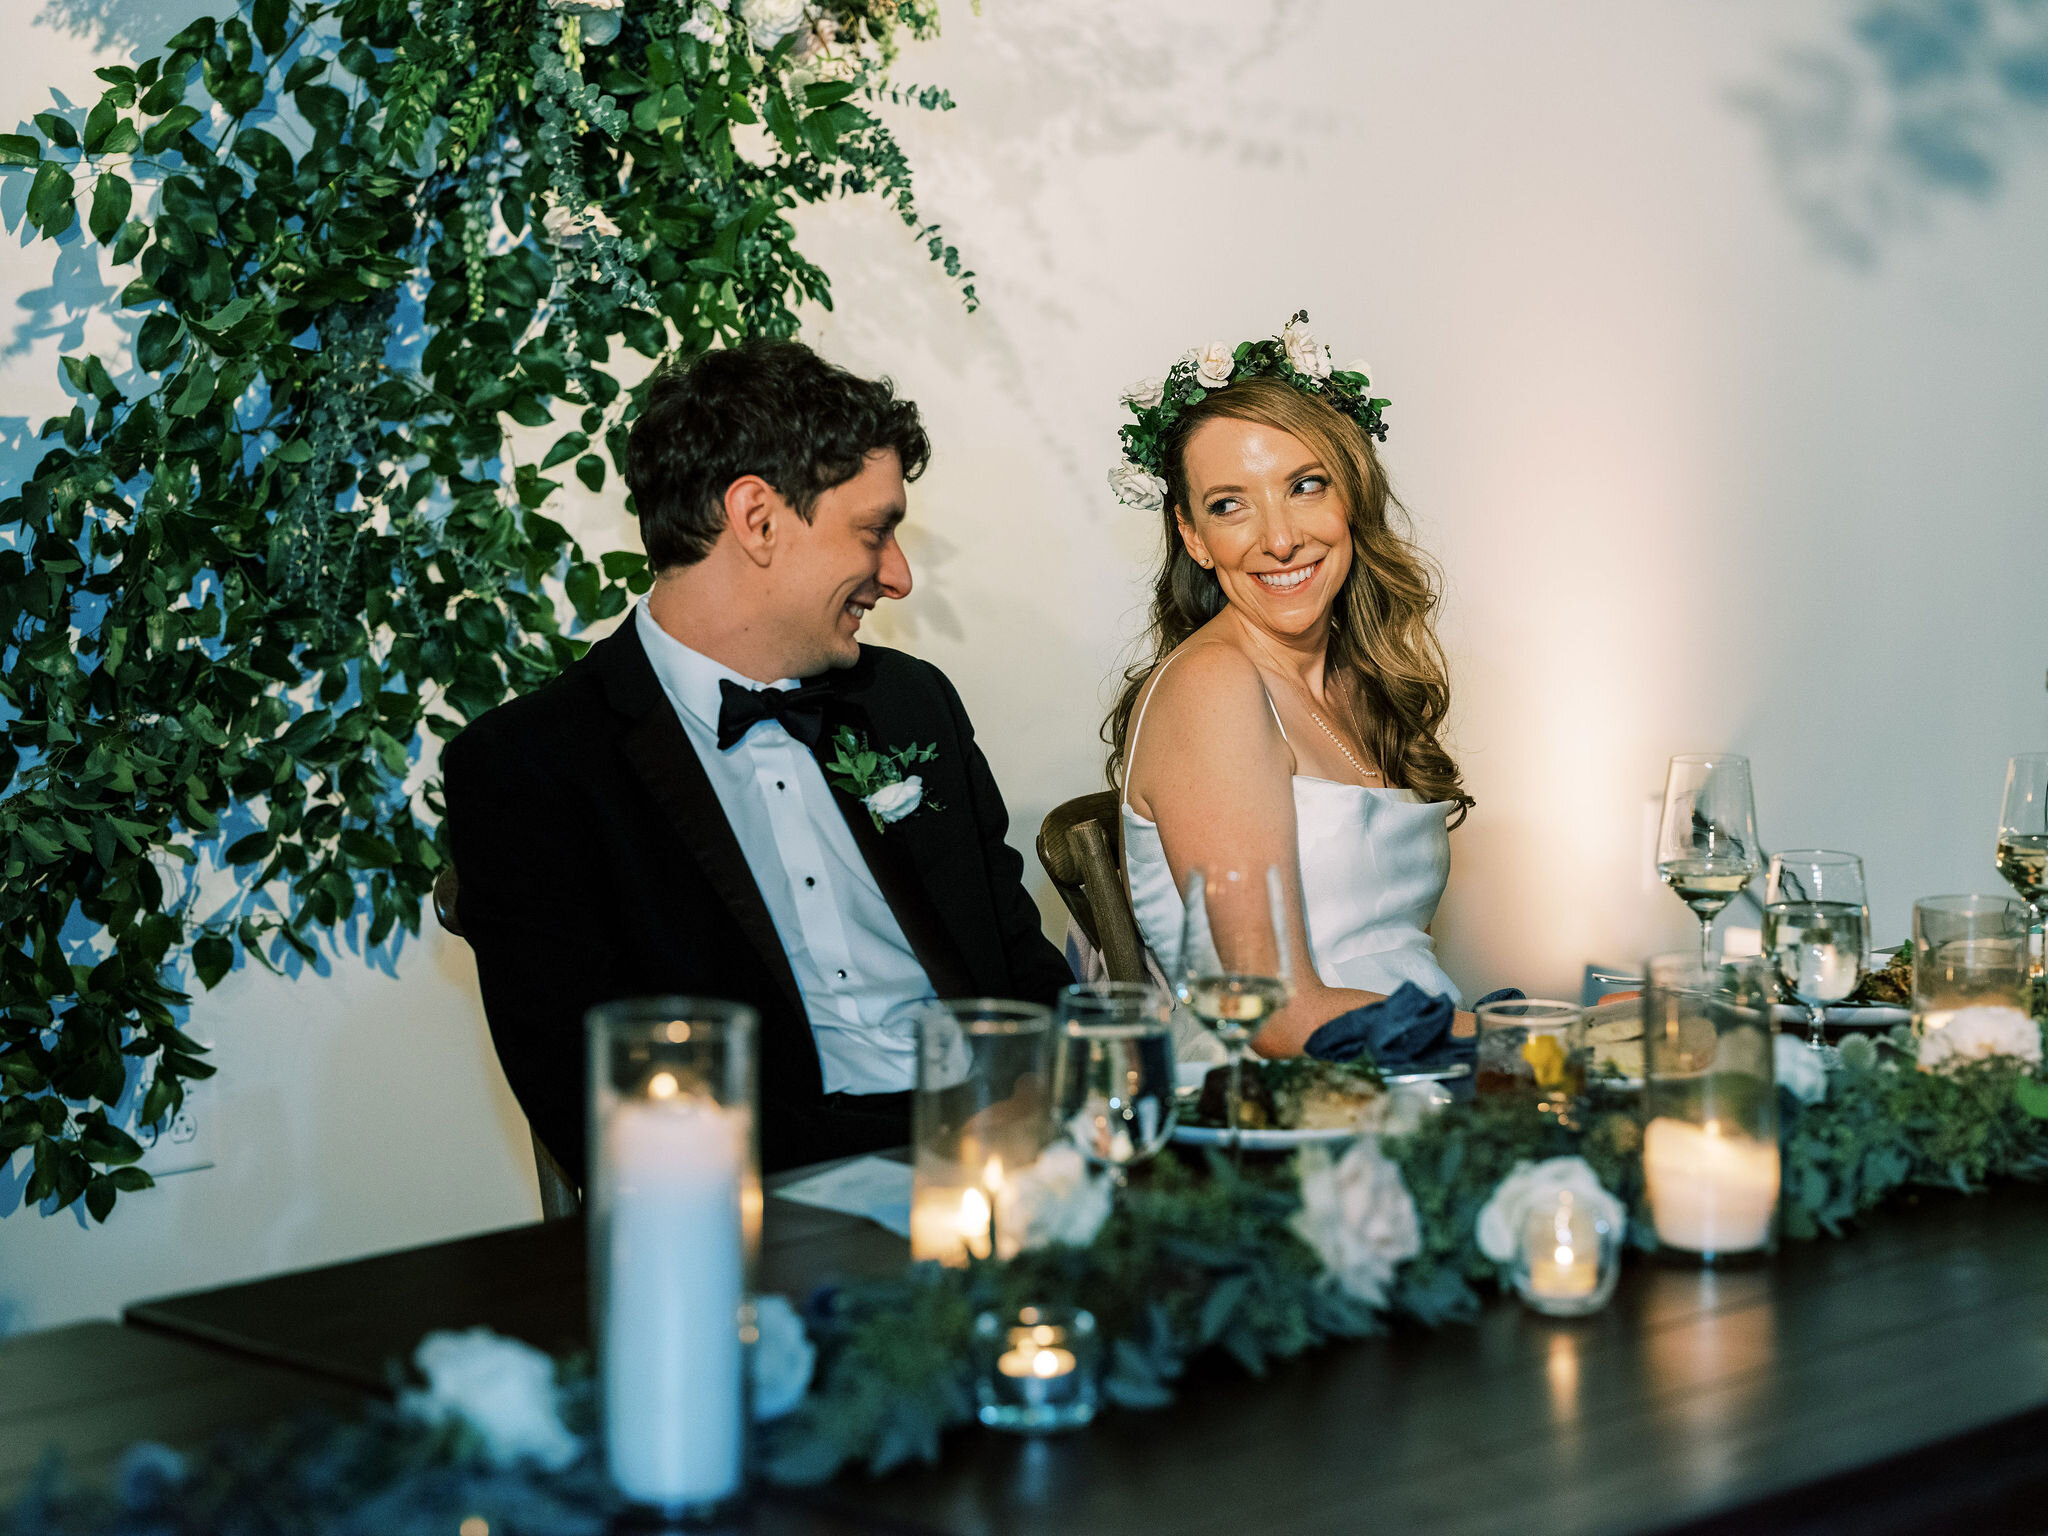 This wedding featured lush table garlands filled with blooms of blush and white garden roses, blue globe thistle, privet berry, seeded eucalyptus and lush greenery. Twinkly pillar candles and votives were scattered throughout the garland. Designed b…